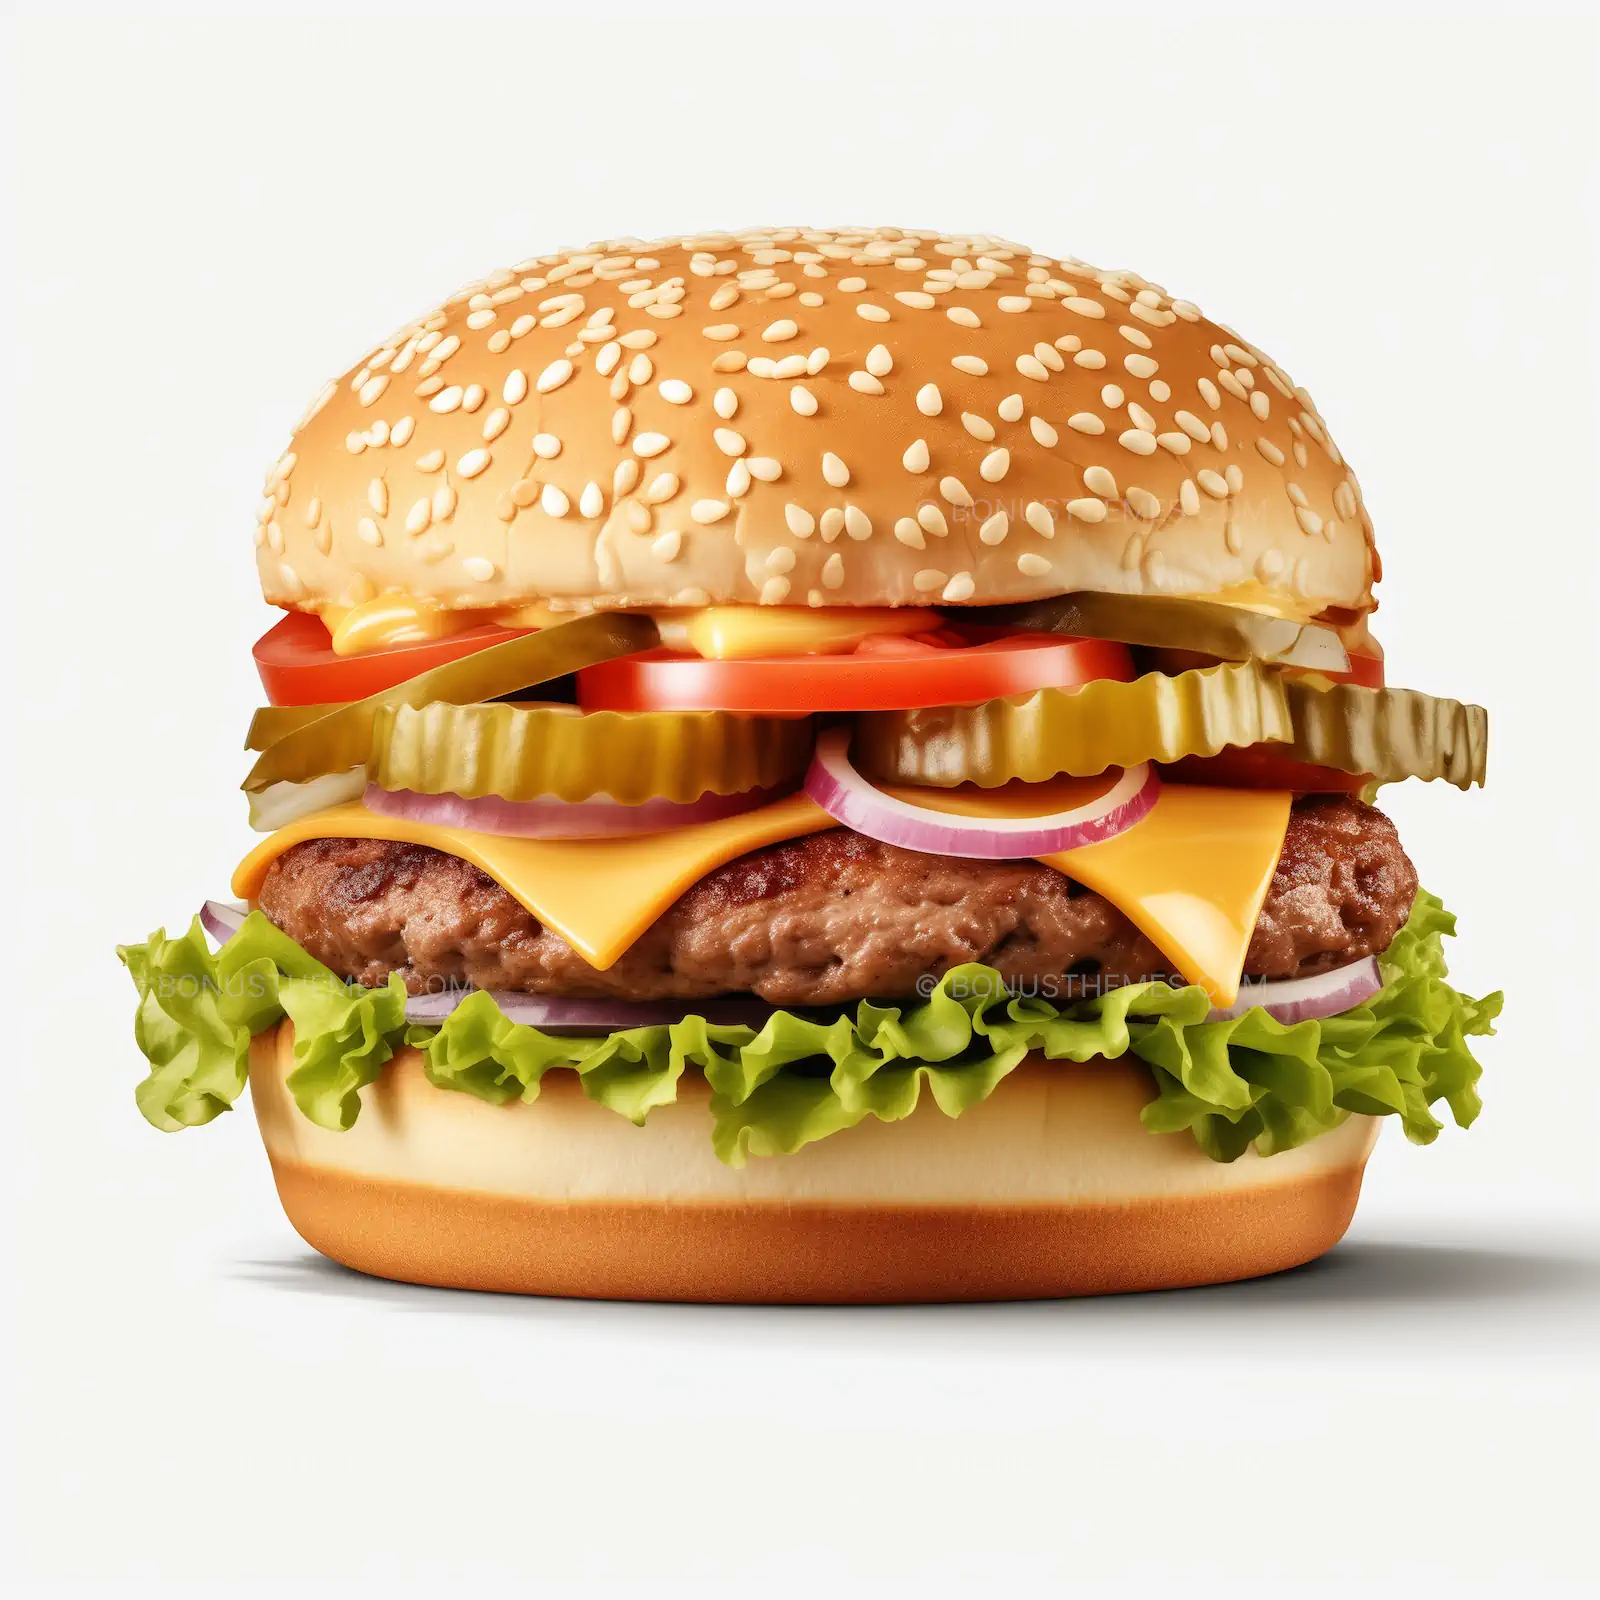 Classic cheeseburger on white background